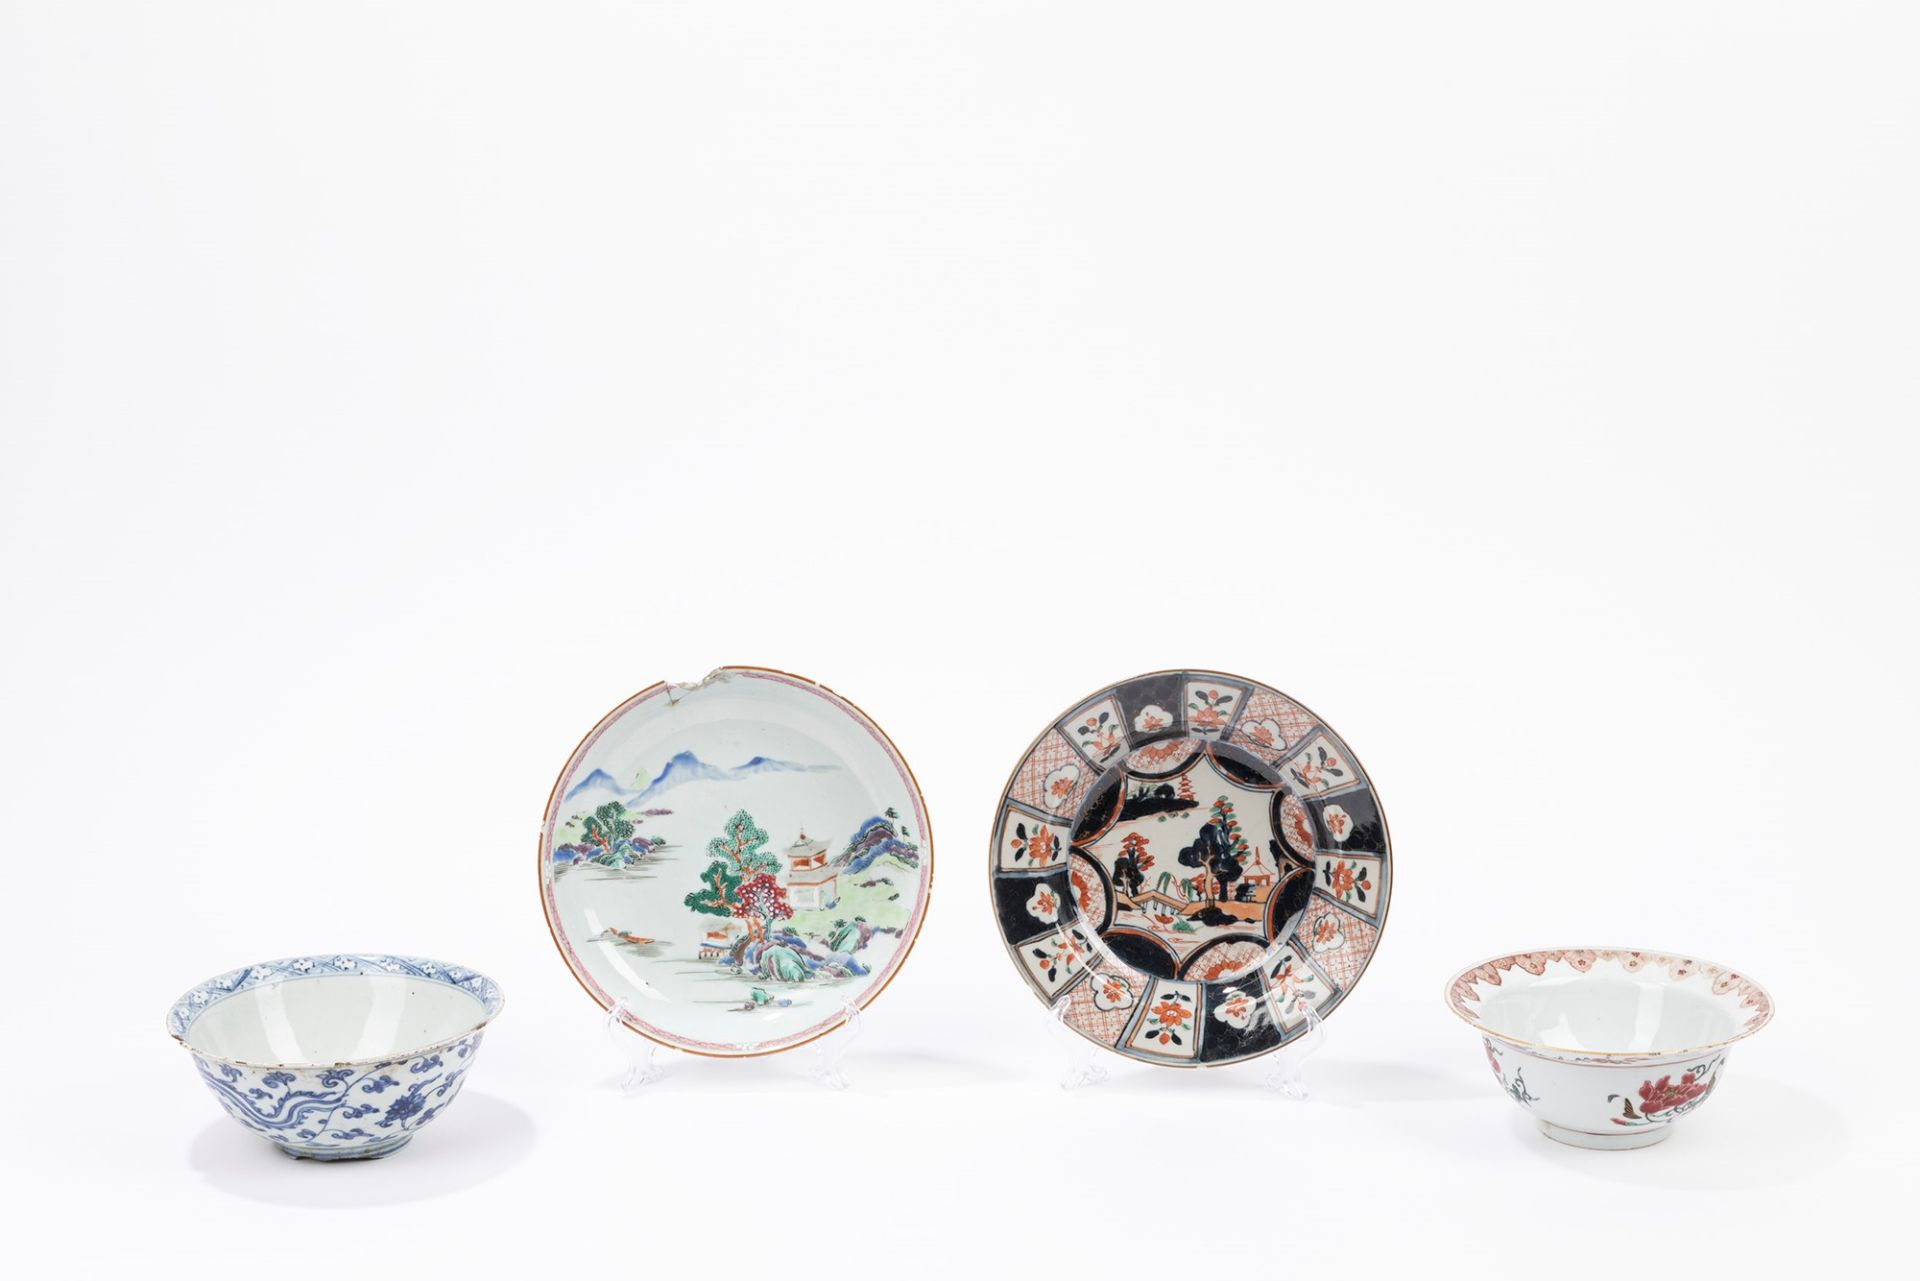 Two plates and two bowls. China, 18th/19th century (defects)